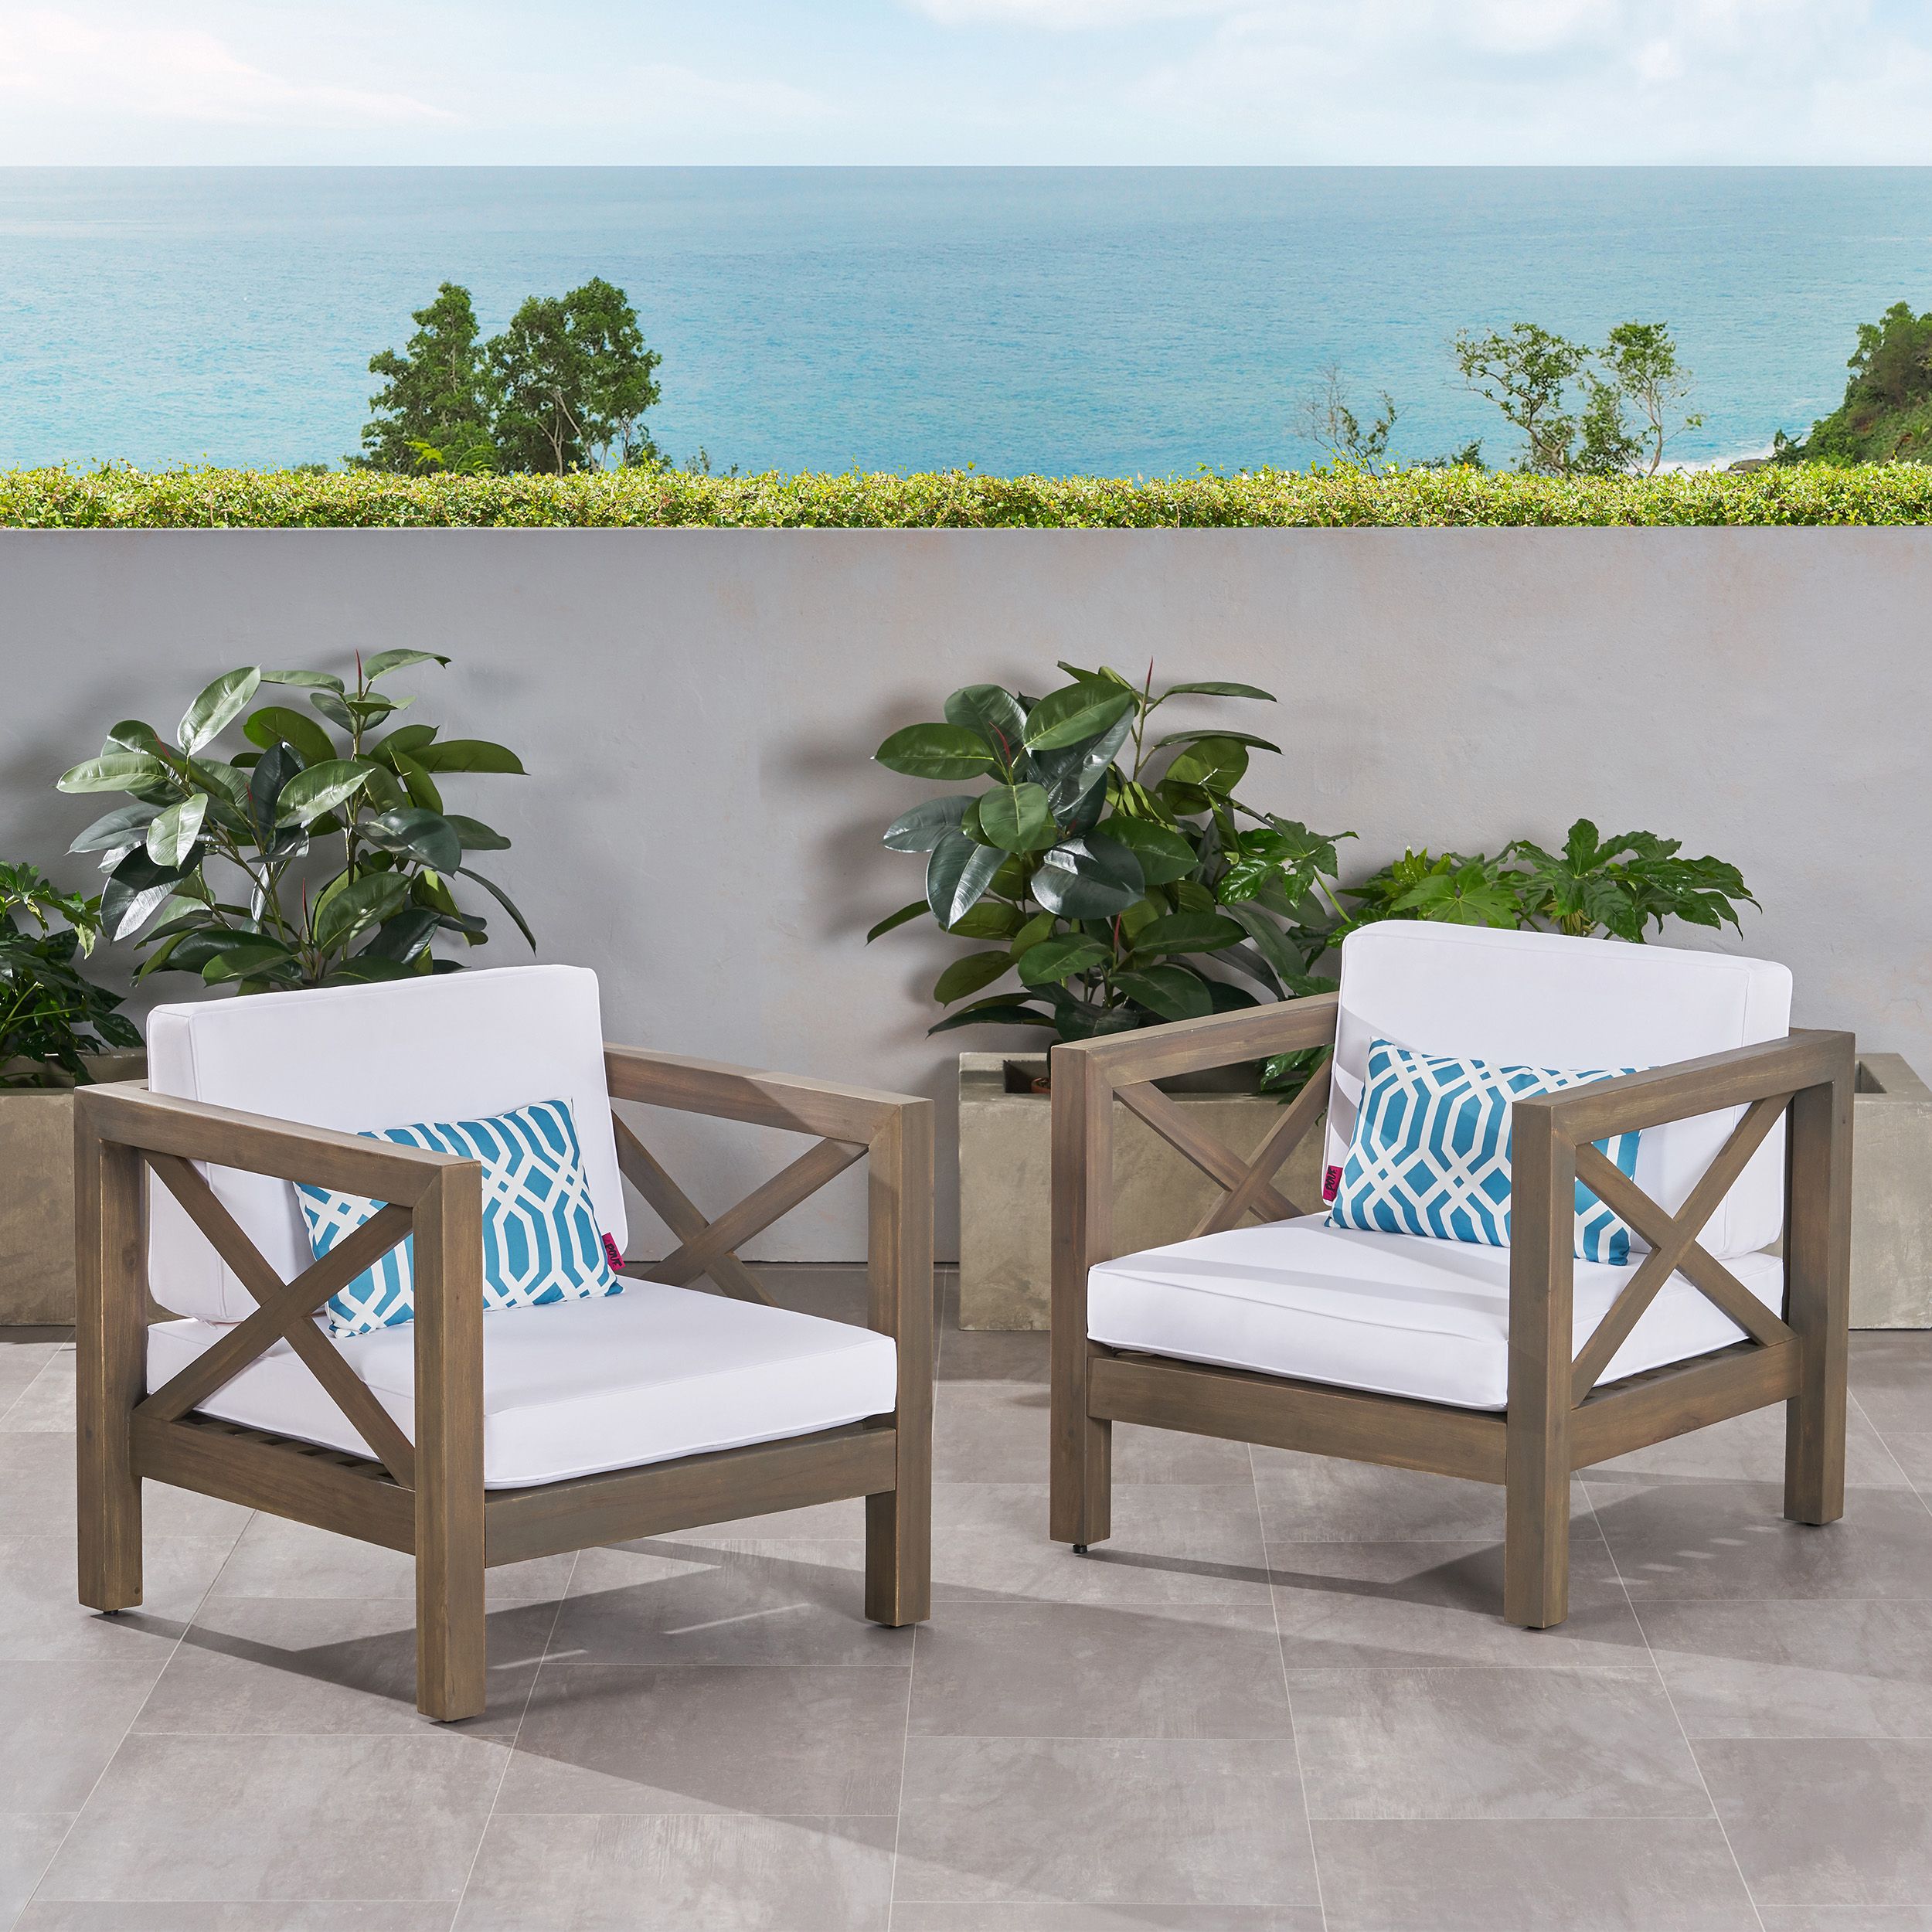 Indira Outdoor Acacia Wood Club Chairs With Cushions (Set Of 2), Gray For White Wood Soutdoor Seating Sets (View 8 of 15)